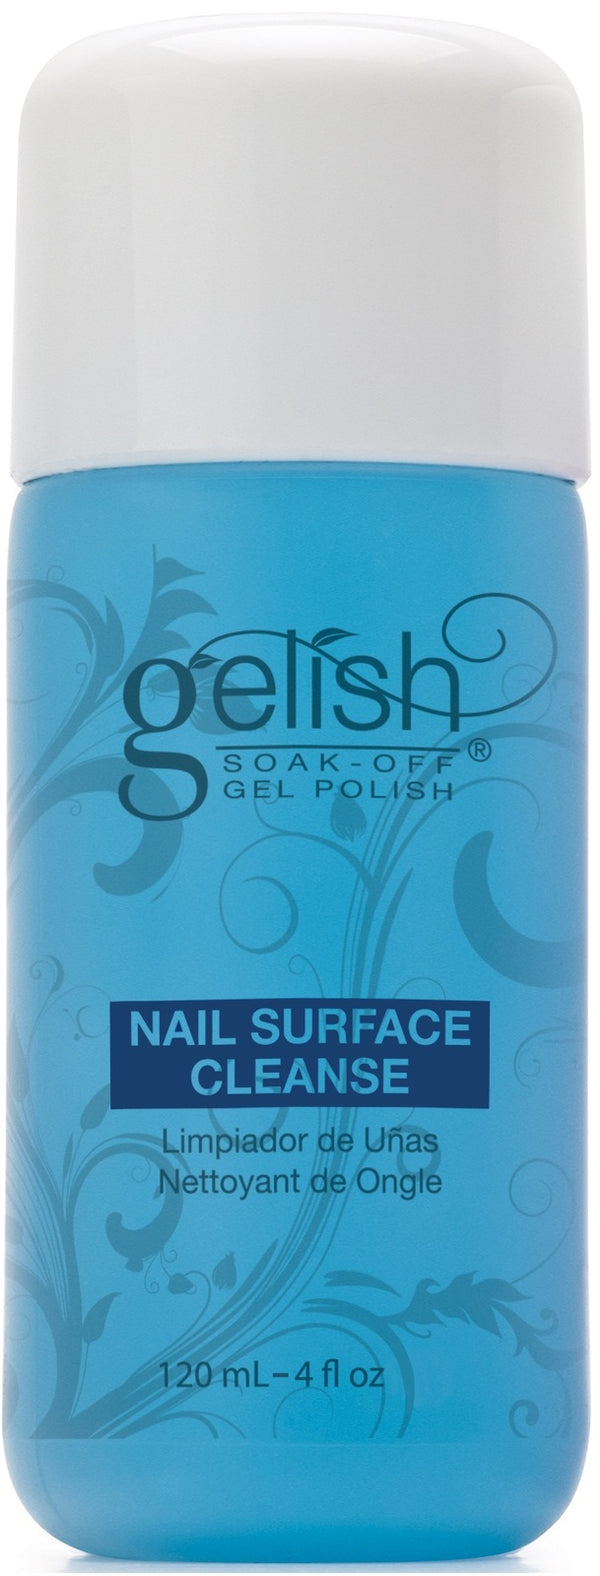 Gelish: Nail Surface Cleanser (120ml)